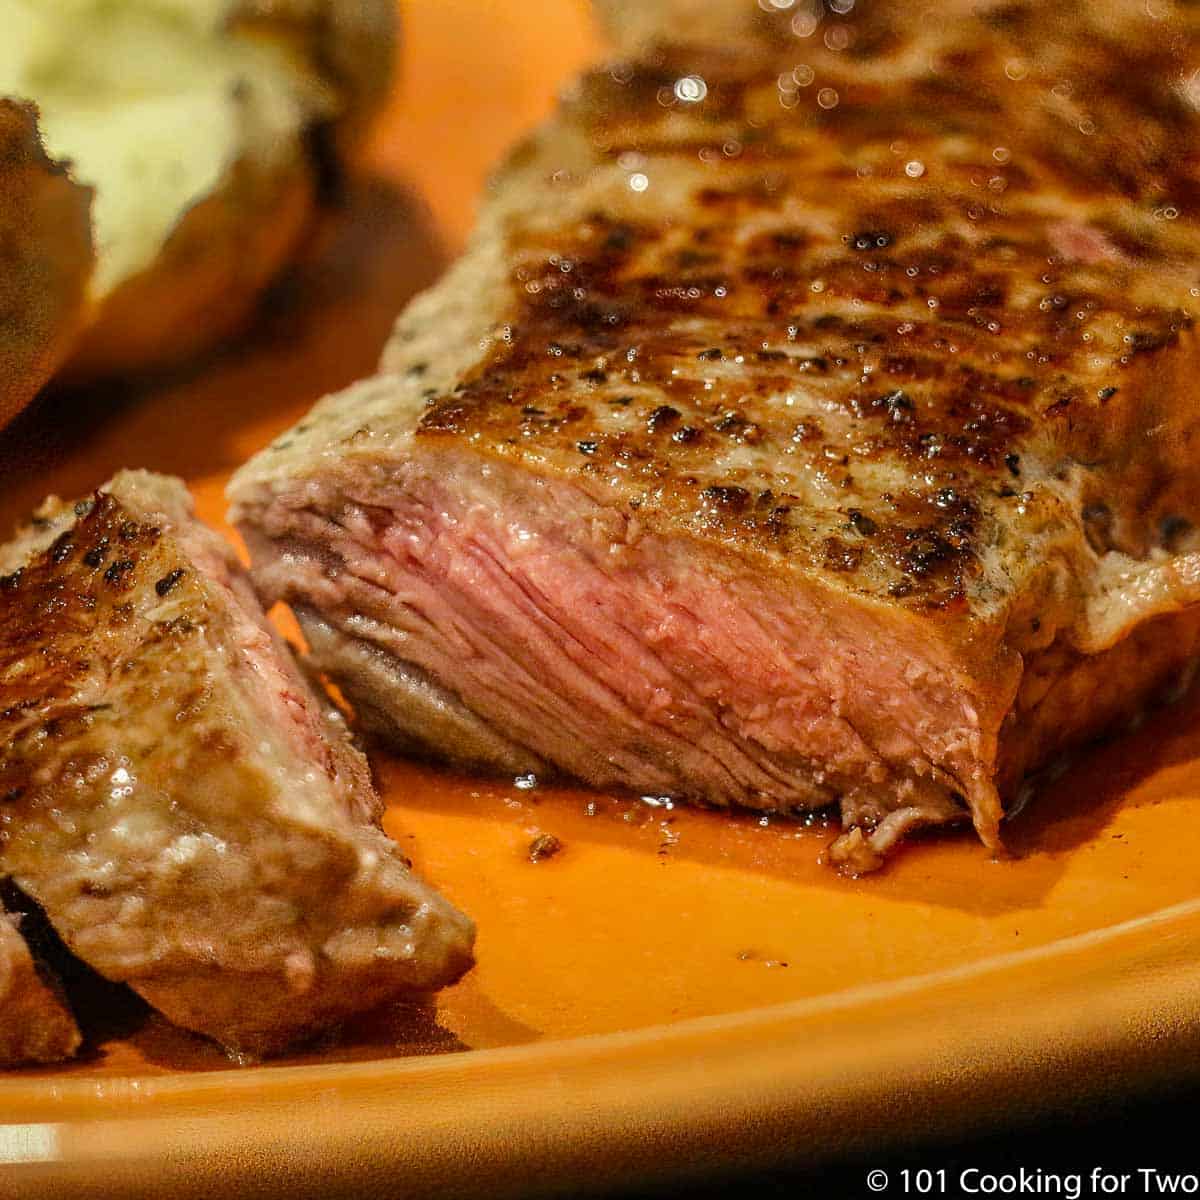 https://www.101cookingfortwo.com/wp-content/uploads/2016/09/Pan-seared-oven-roasted-strip-steak-1a.jpg